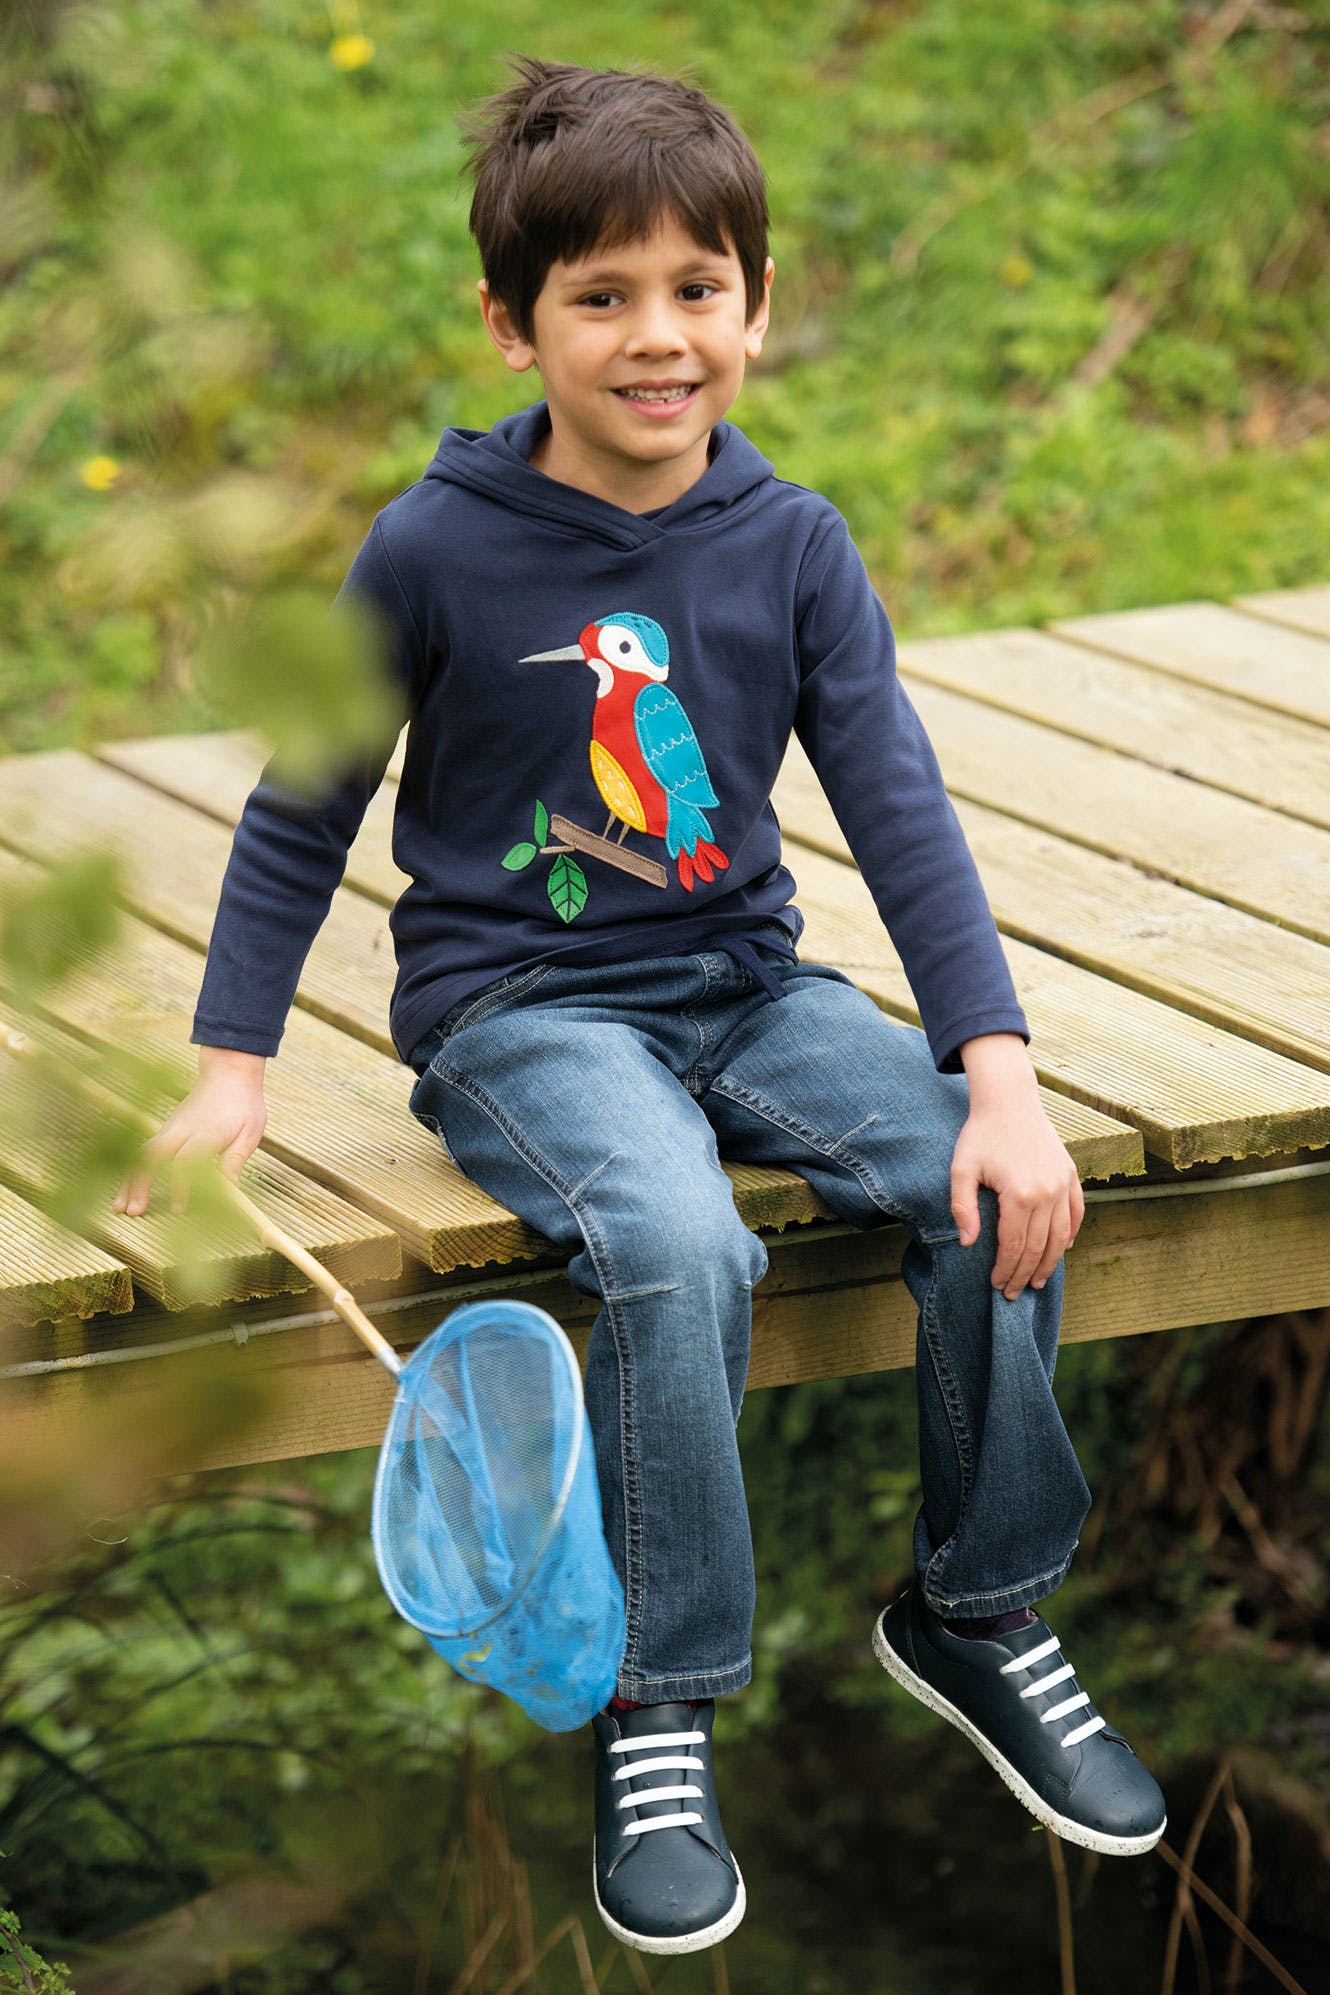 Frugi Cody Comfy Jeans-Kids-Ohh! By Gum - Shop Sustainable